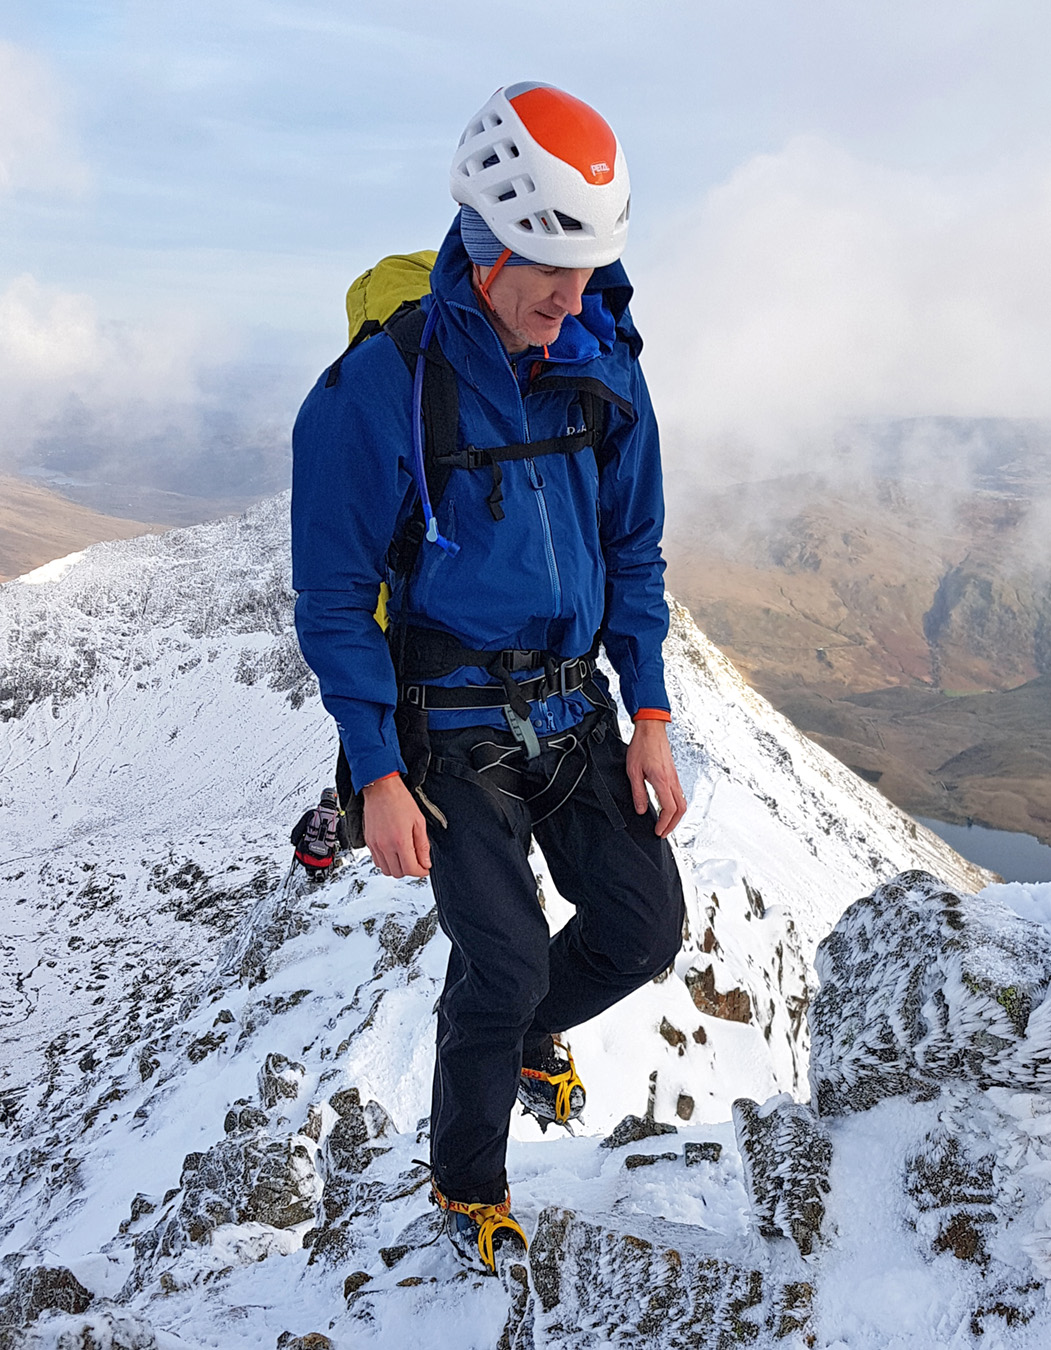 Stewart Moody testing the Rab Kangri GTX Pant in winter conditions in Snowdonia.